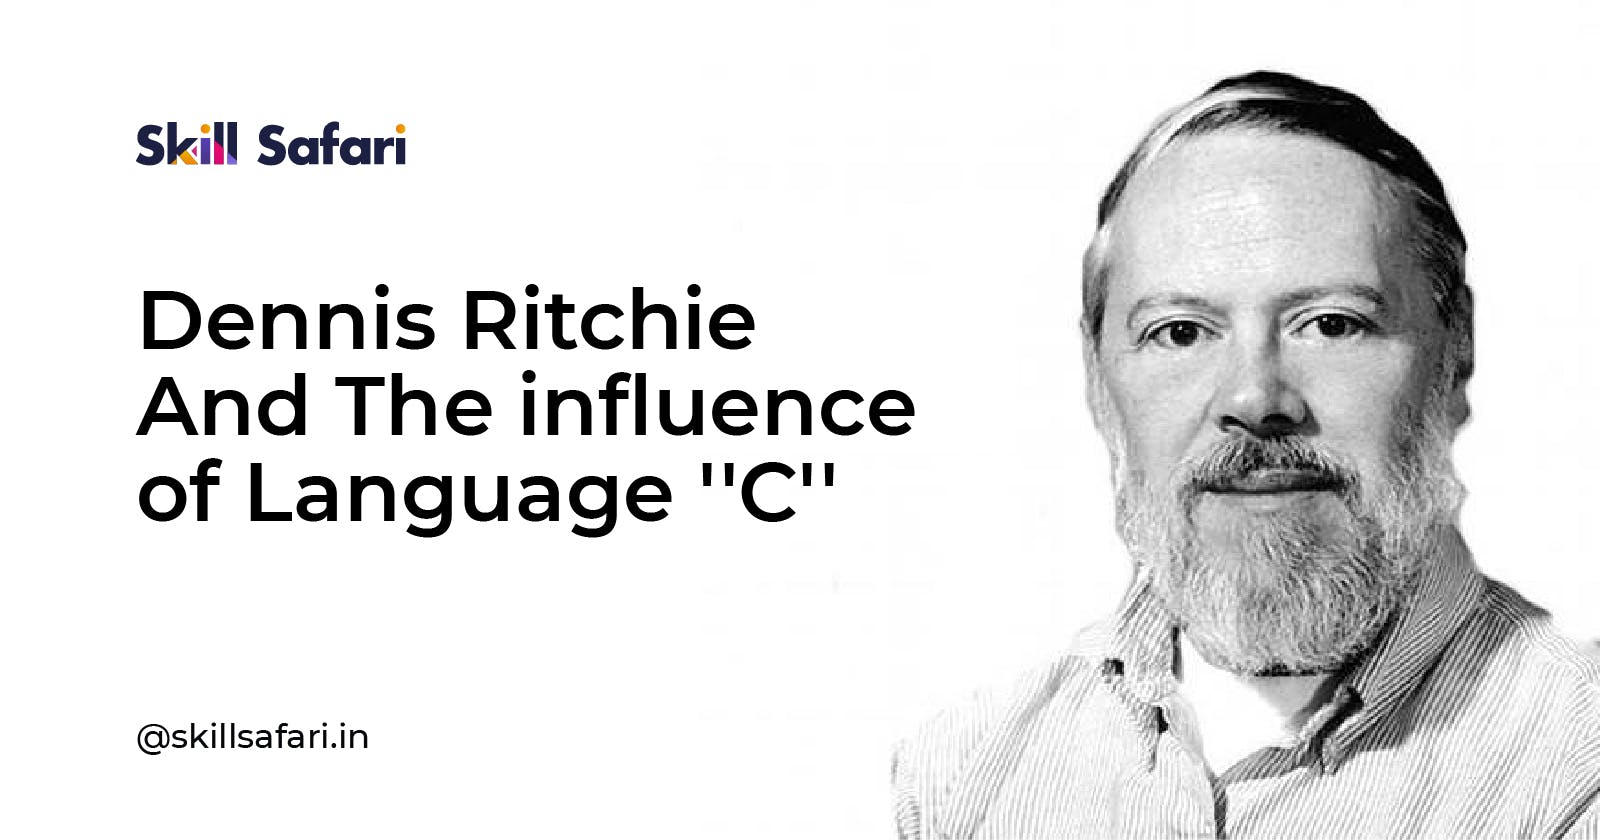 Dennis Ritchie And The influence of Language ''C''